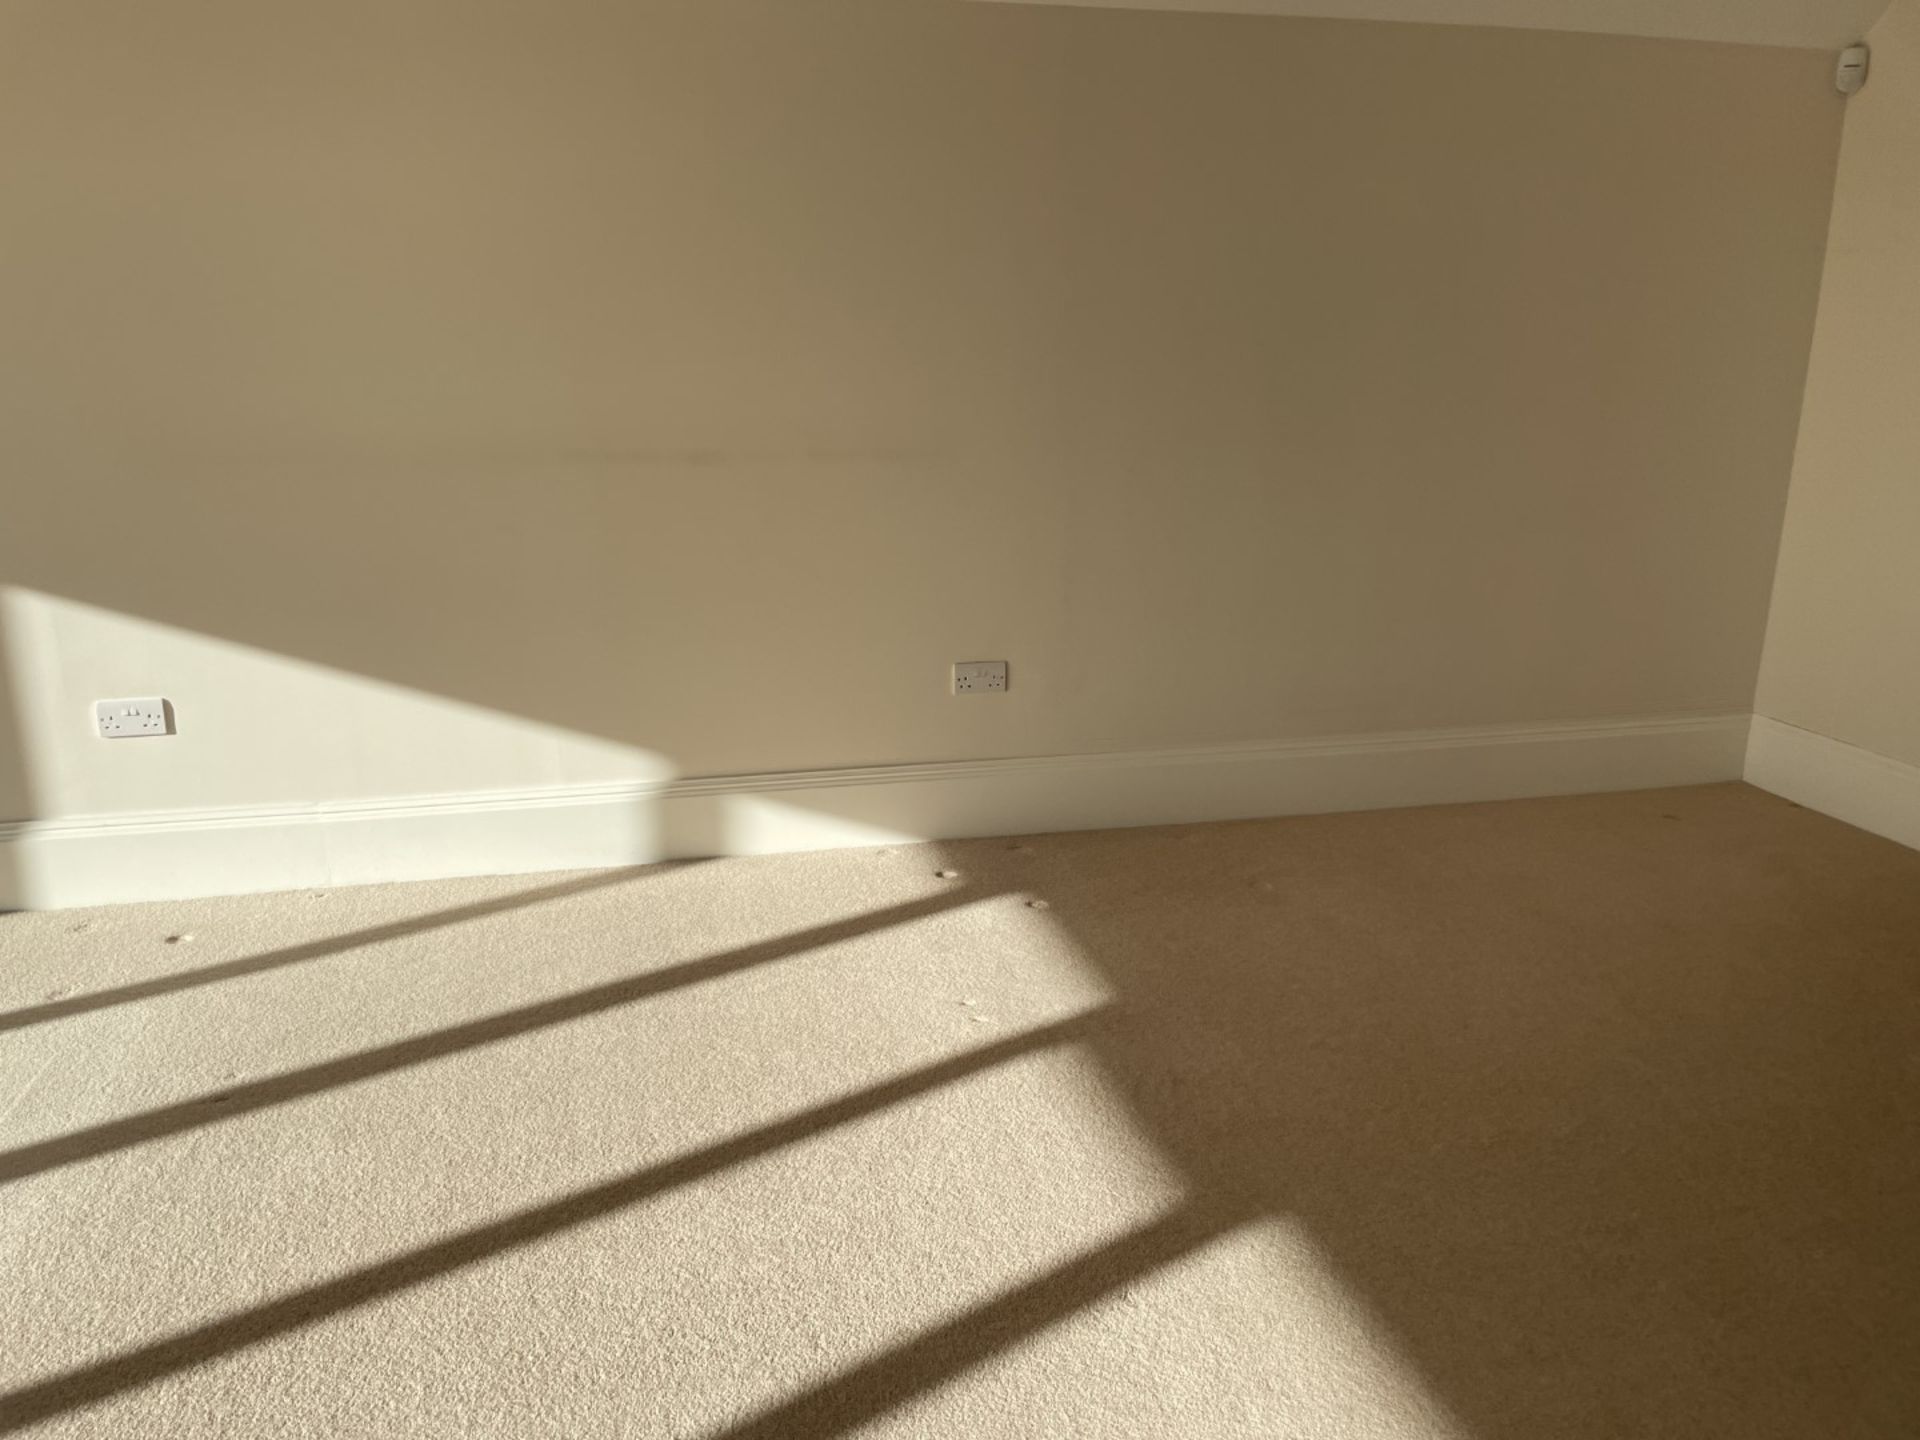 1 x Approximately 22-Metres of Painted Timber Wooden Skirting Boards, In White - Ref: PAN224 - CL896 - Image 7 of 10